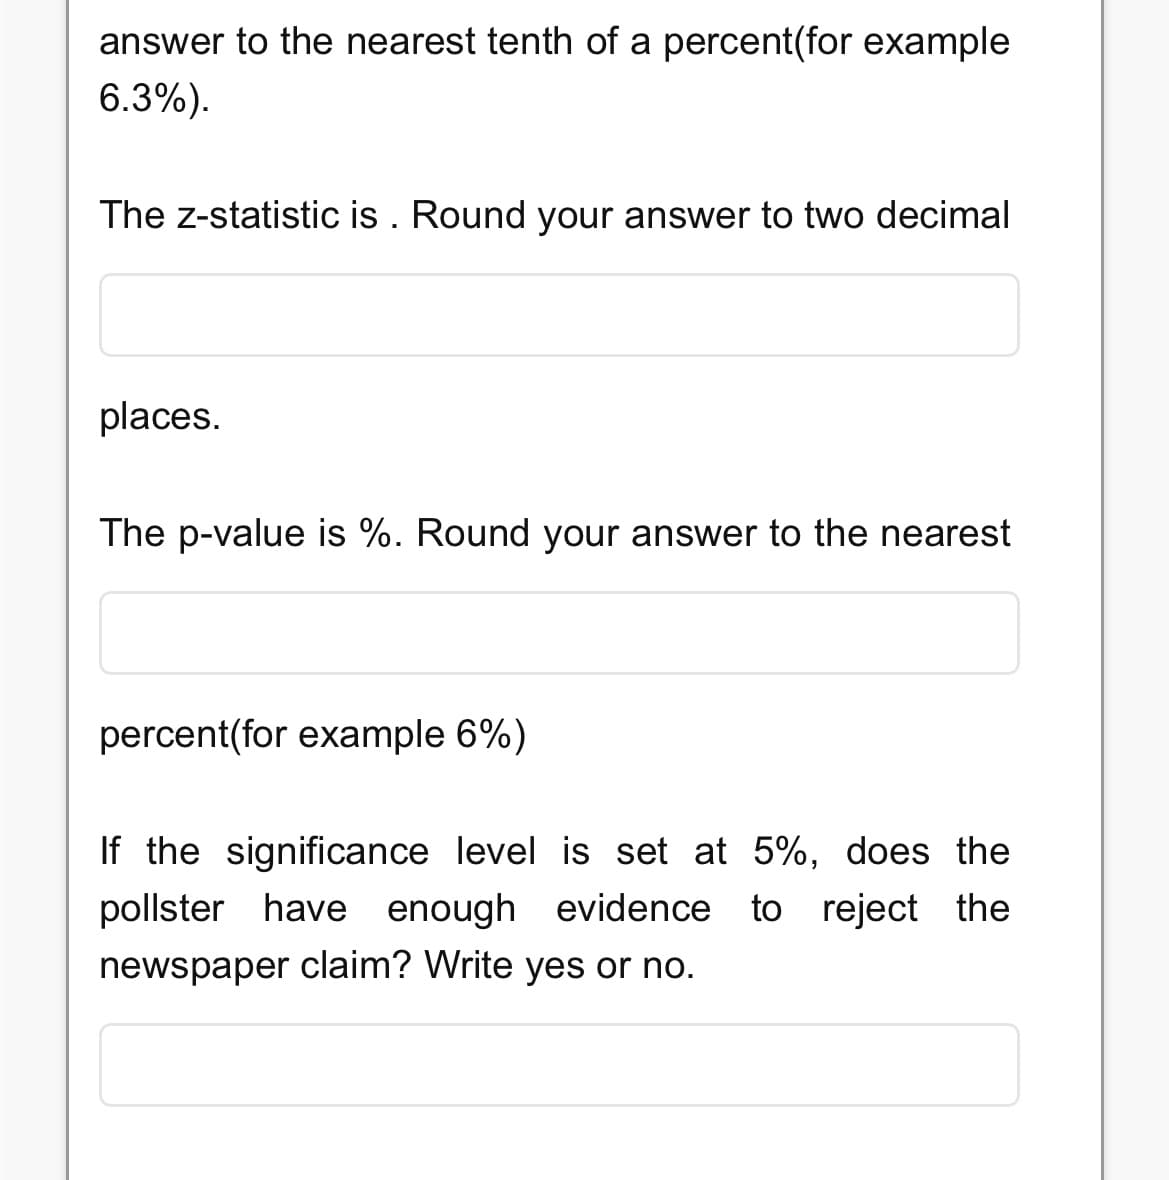 answer to the nearest tenth of a percent(for example
6.3%).
The z-statistic is. Round your answer to two decimal
places.
The p-value is %. Round your answer to the nearest
percent(for example 6%)
If the significance level is set at 5%, does the
pollster have enough evidence to reject the
newspaper claim? Write yes or no.